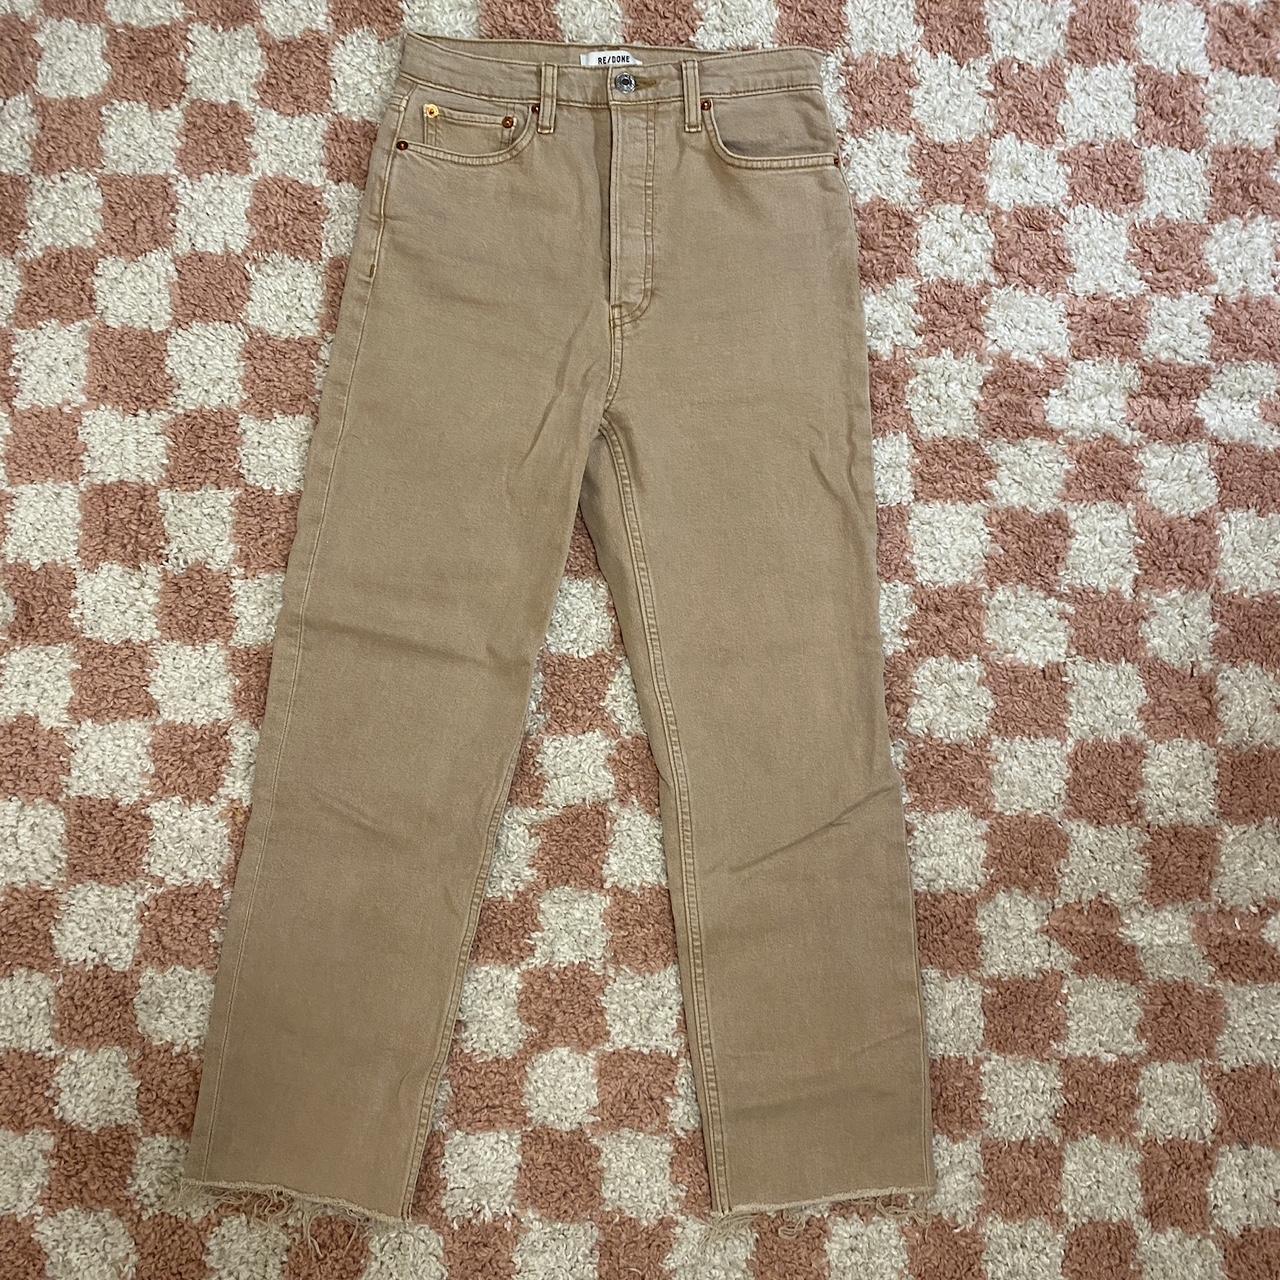 RE/DONE Women's Tan and Brown Jeans